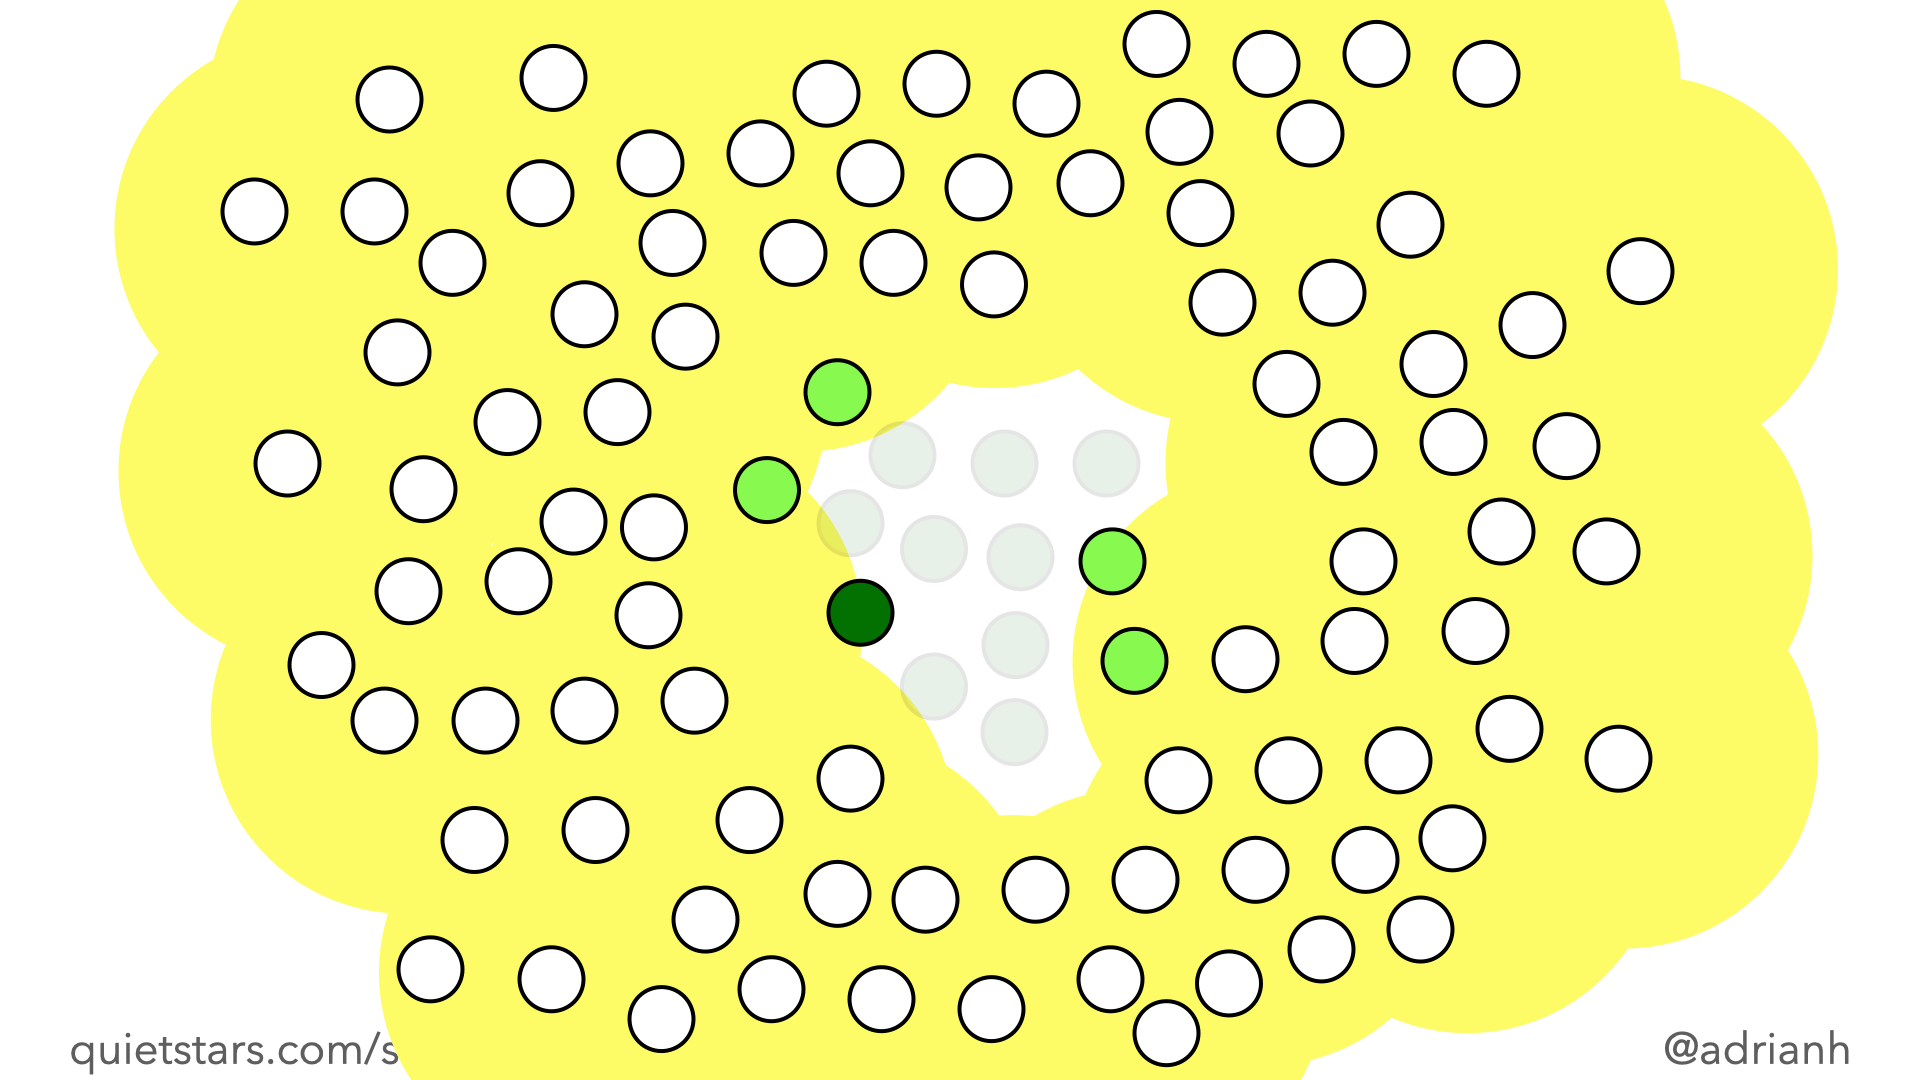 Ten green and four light green circles are clustered in the middle of the image, surrounded by a small gap, and then 86 white circles. The white circles are surrounded with a yellow highlight. Because of the gap — the yellow highlight touches almost no green circles.